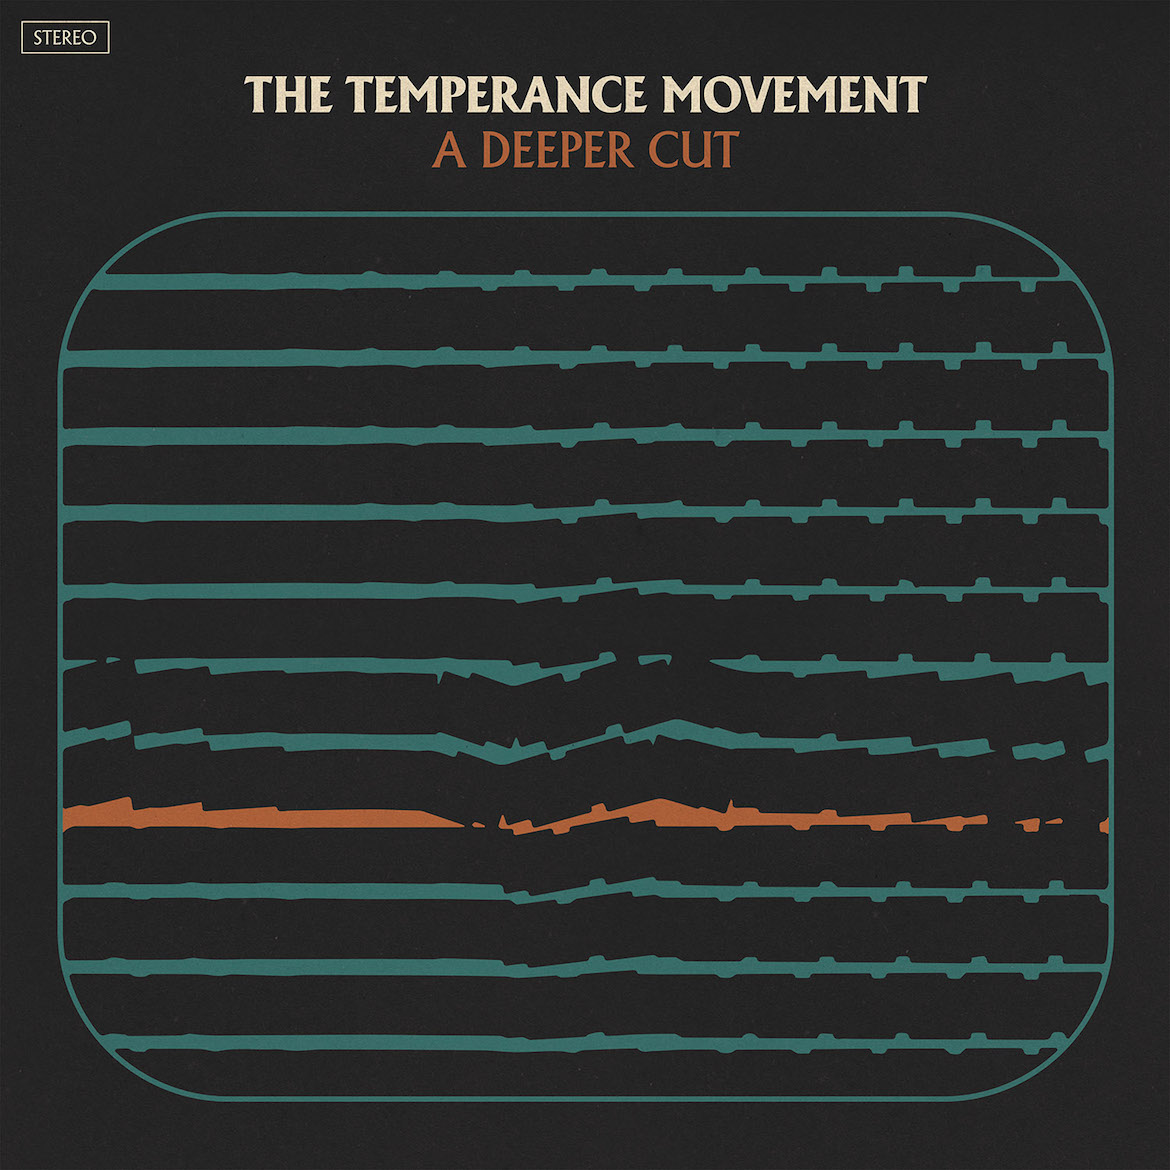 A Deeper Cut Album Cover by The Temperance Movement